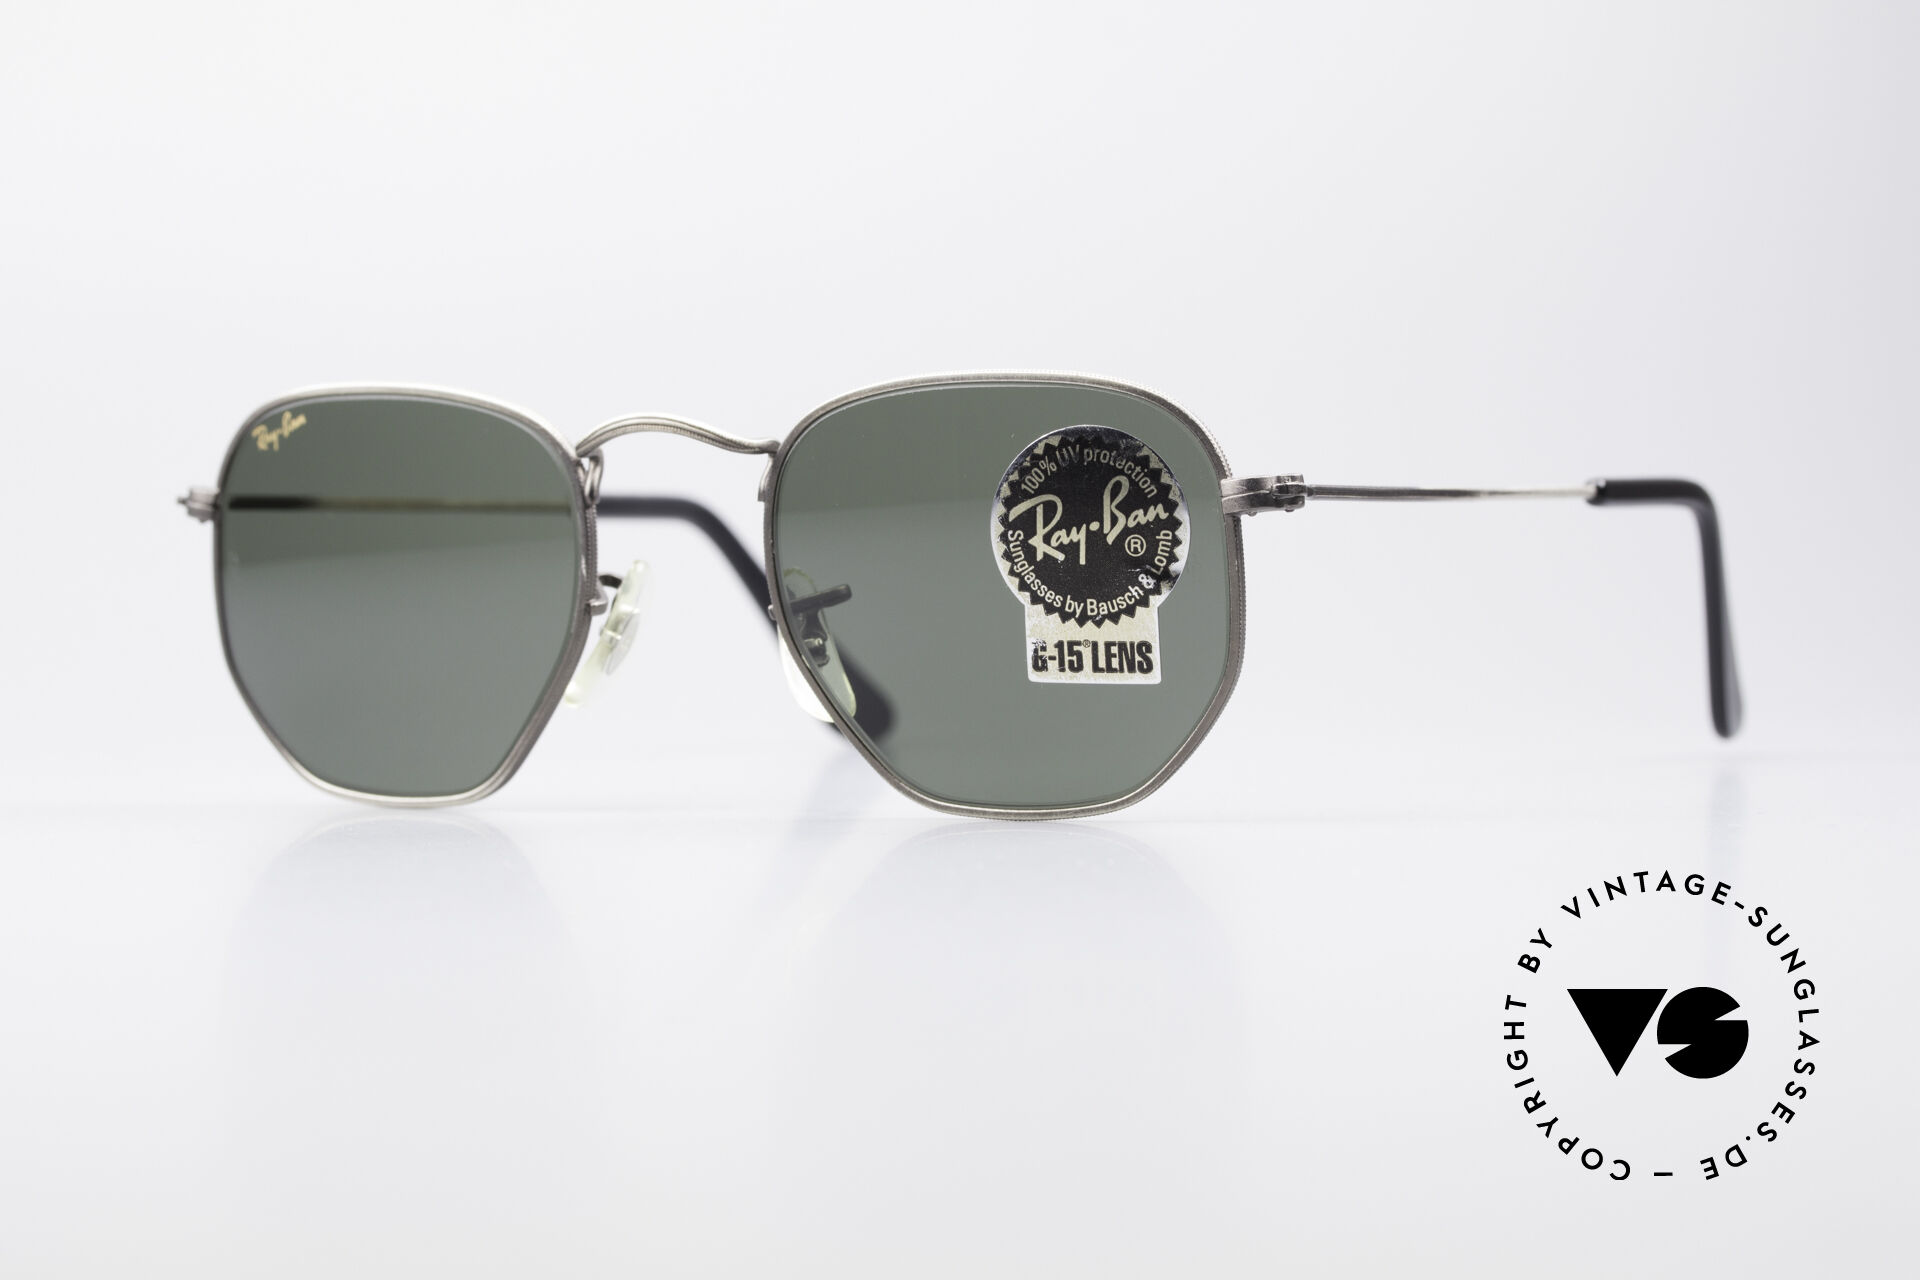 https://www.vintage-sunglasses-shop.com/media/products6/full/14287_15916_Ray-Ban-Classic-Style-III_BandL-USA-Sunglasses-Antique_Men_Women_Classic_Sunglasses.jpg